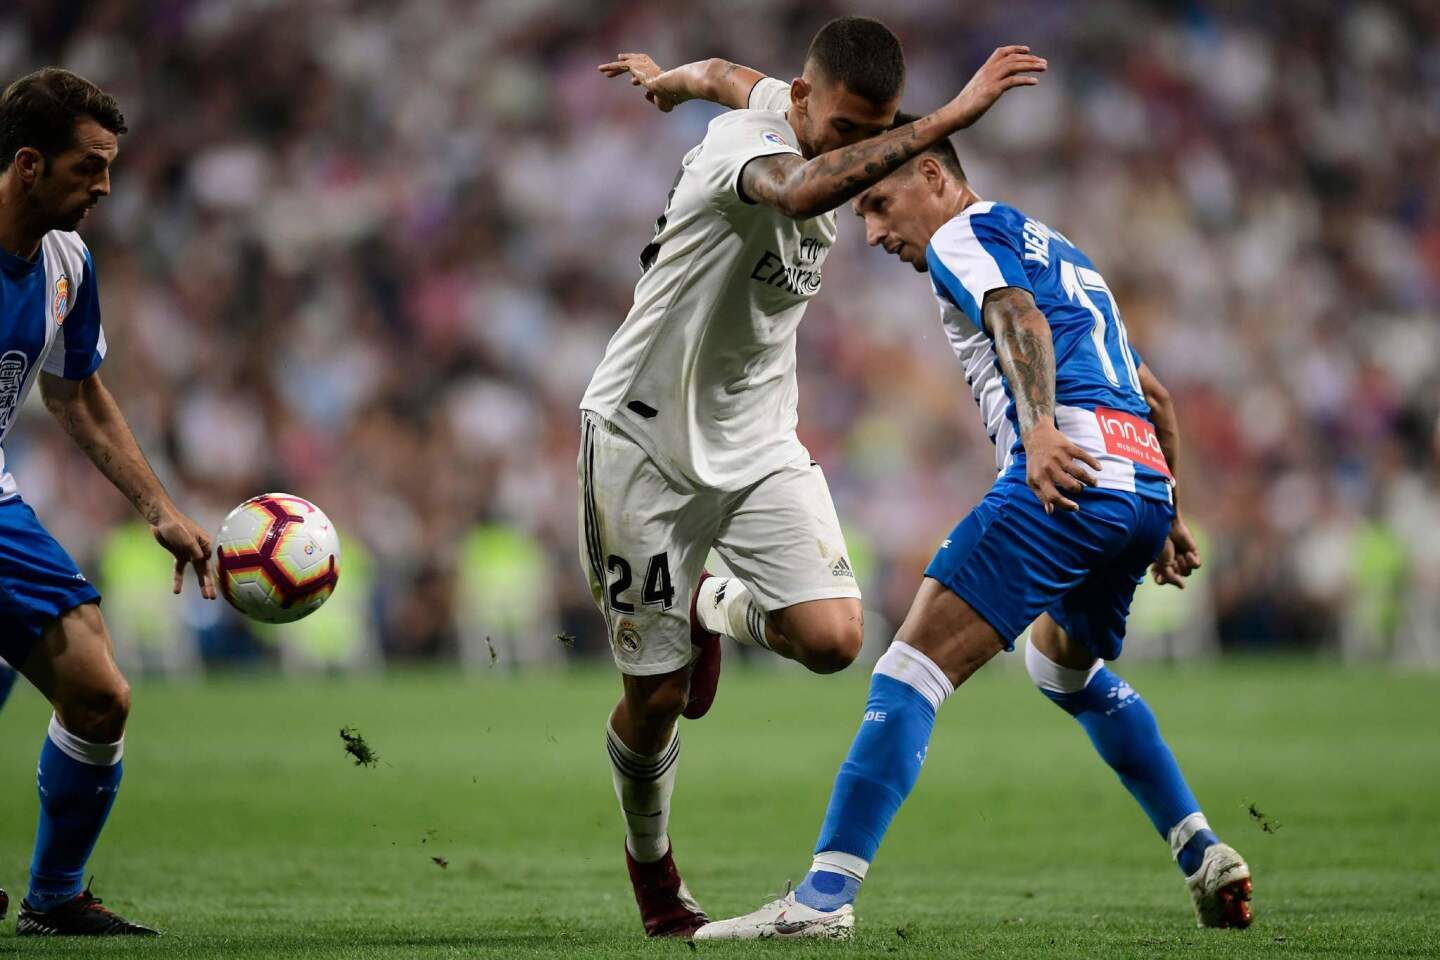 Real Madrid's Spanish midfielder Daniel Ceballos (C) vies for the ball with Espanyol's Paraguayan forward Hernan Perez during the Spanish league football match between Real Madrid CF and RCD Espanyol at the Santiago Bernabeu stadium in Madrid on September 22, 2018. (Photo by JAVIER SORIANO / AFP)JAVIER SORIANO/AFP/Getty Images ** OUTS - ELSENT, FPG, CM - OUTS * NM, PH, VA if sourced by CT, LA or MoD **